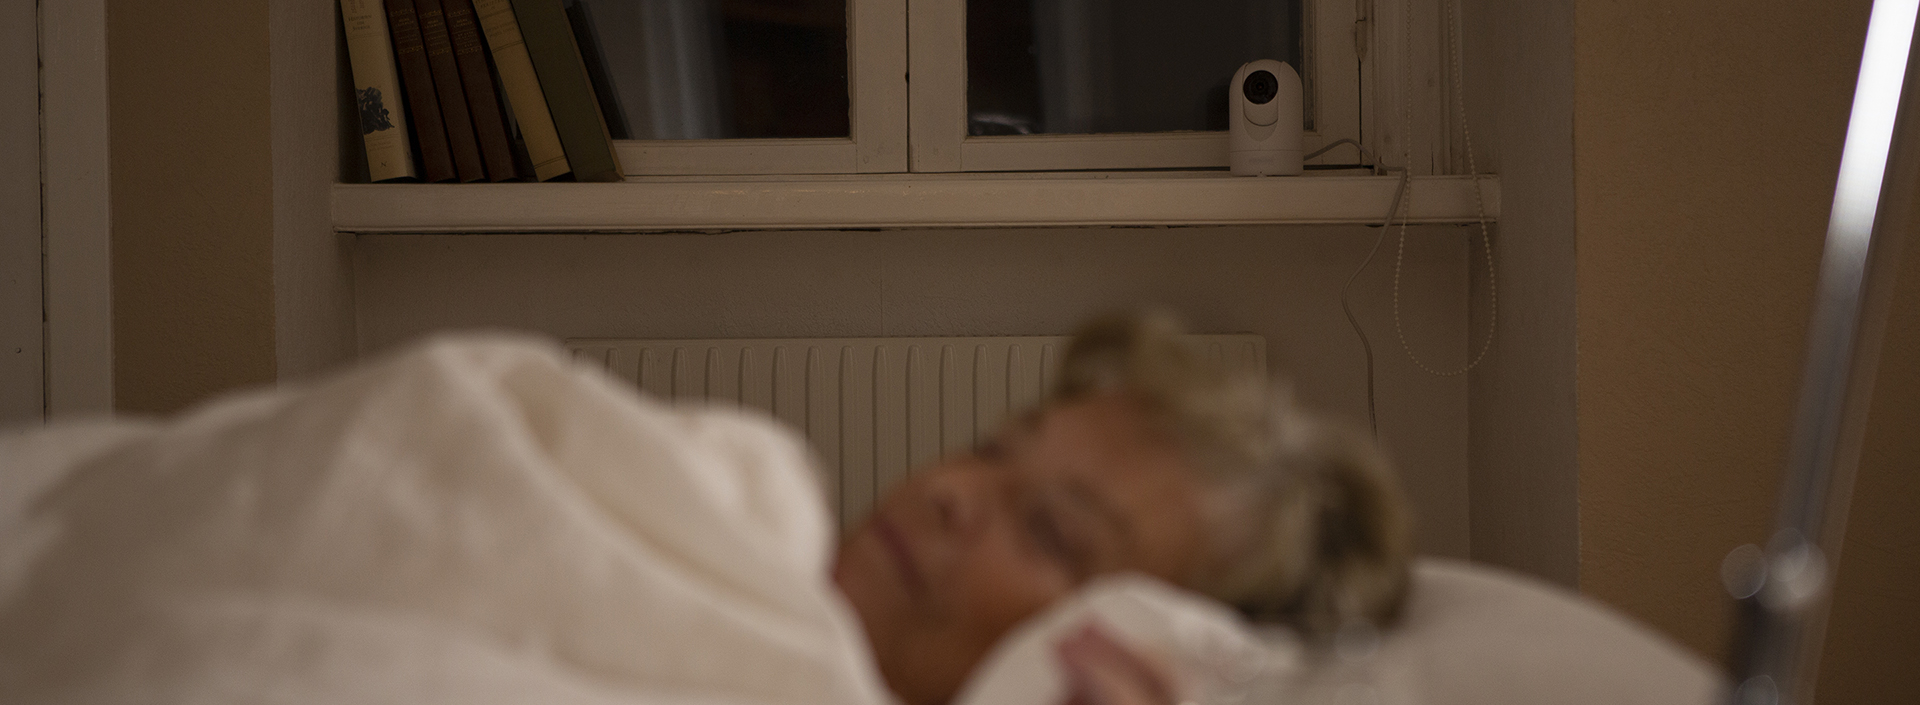 Monitoring via camera of a lady sleeping in bed